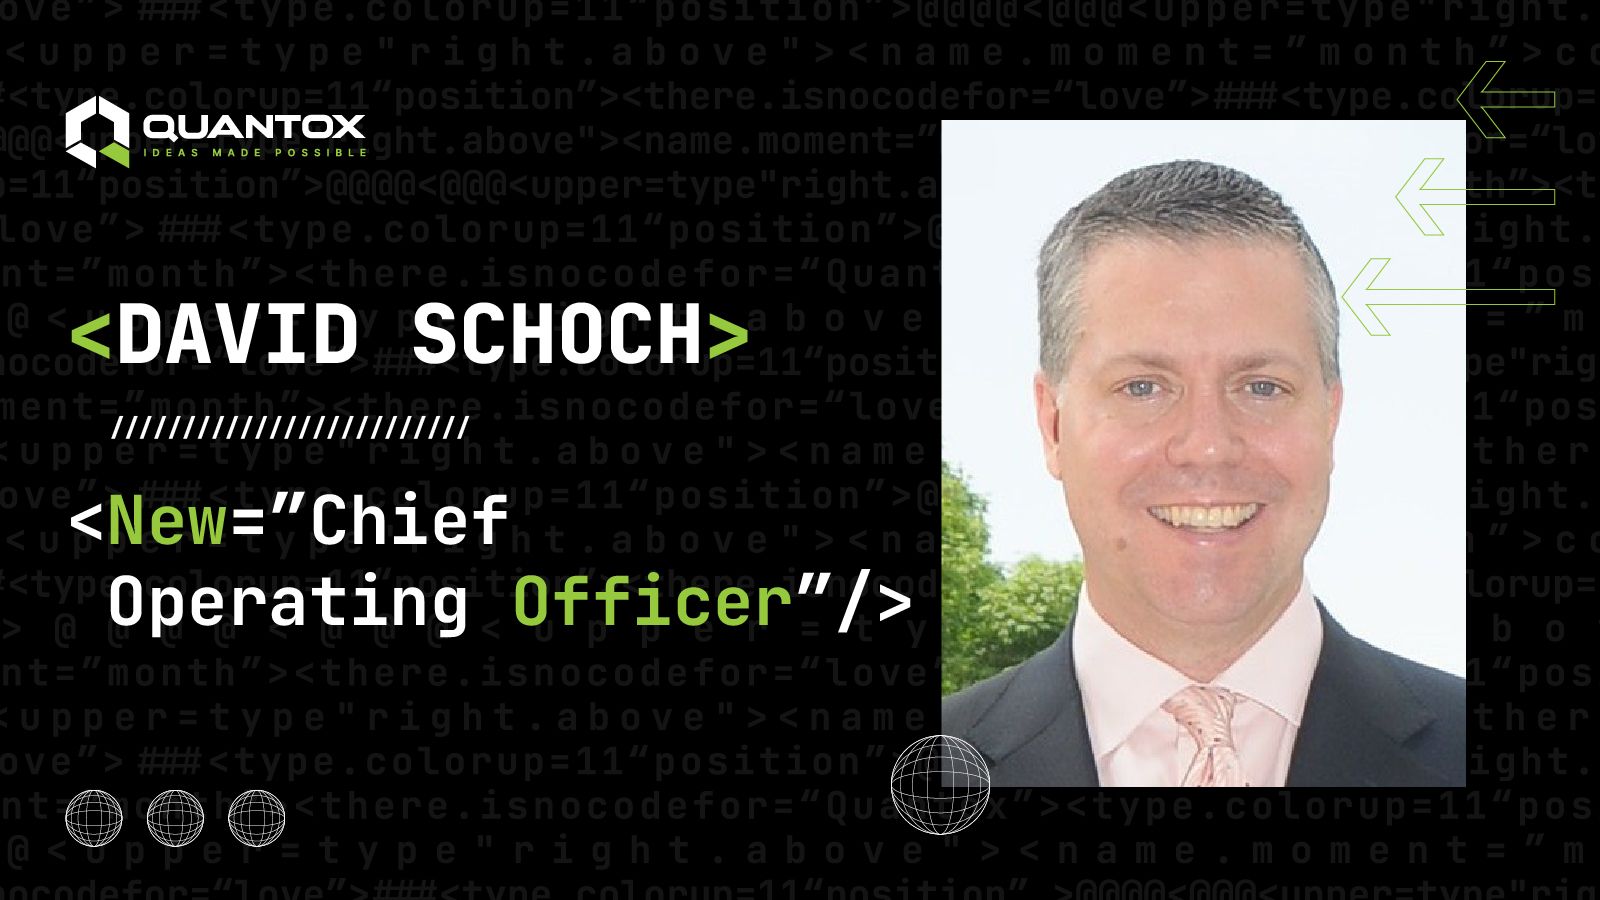 David Schoch Joins Quantox Technology! Entering a New Phase of Development with the New COO